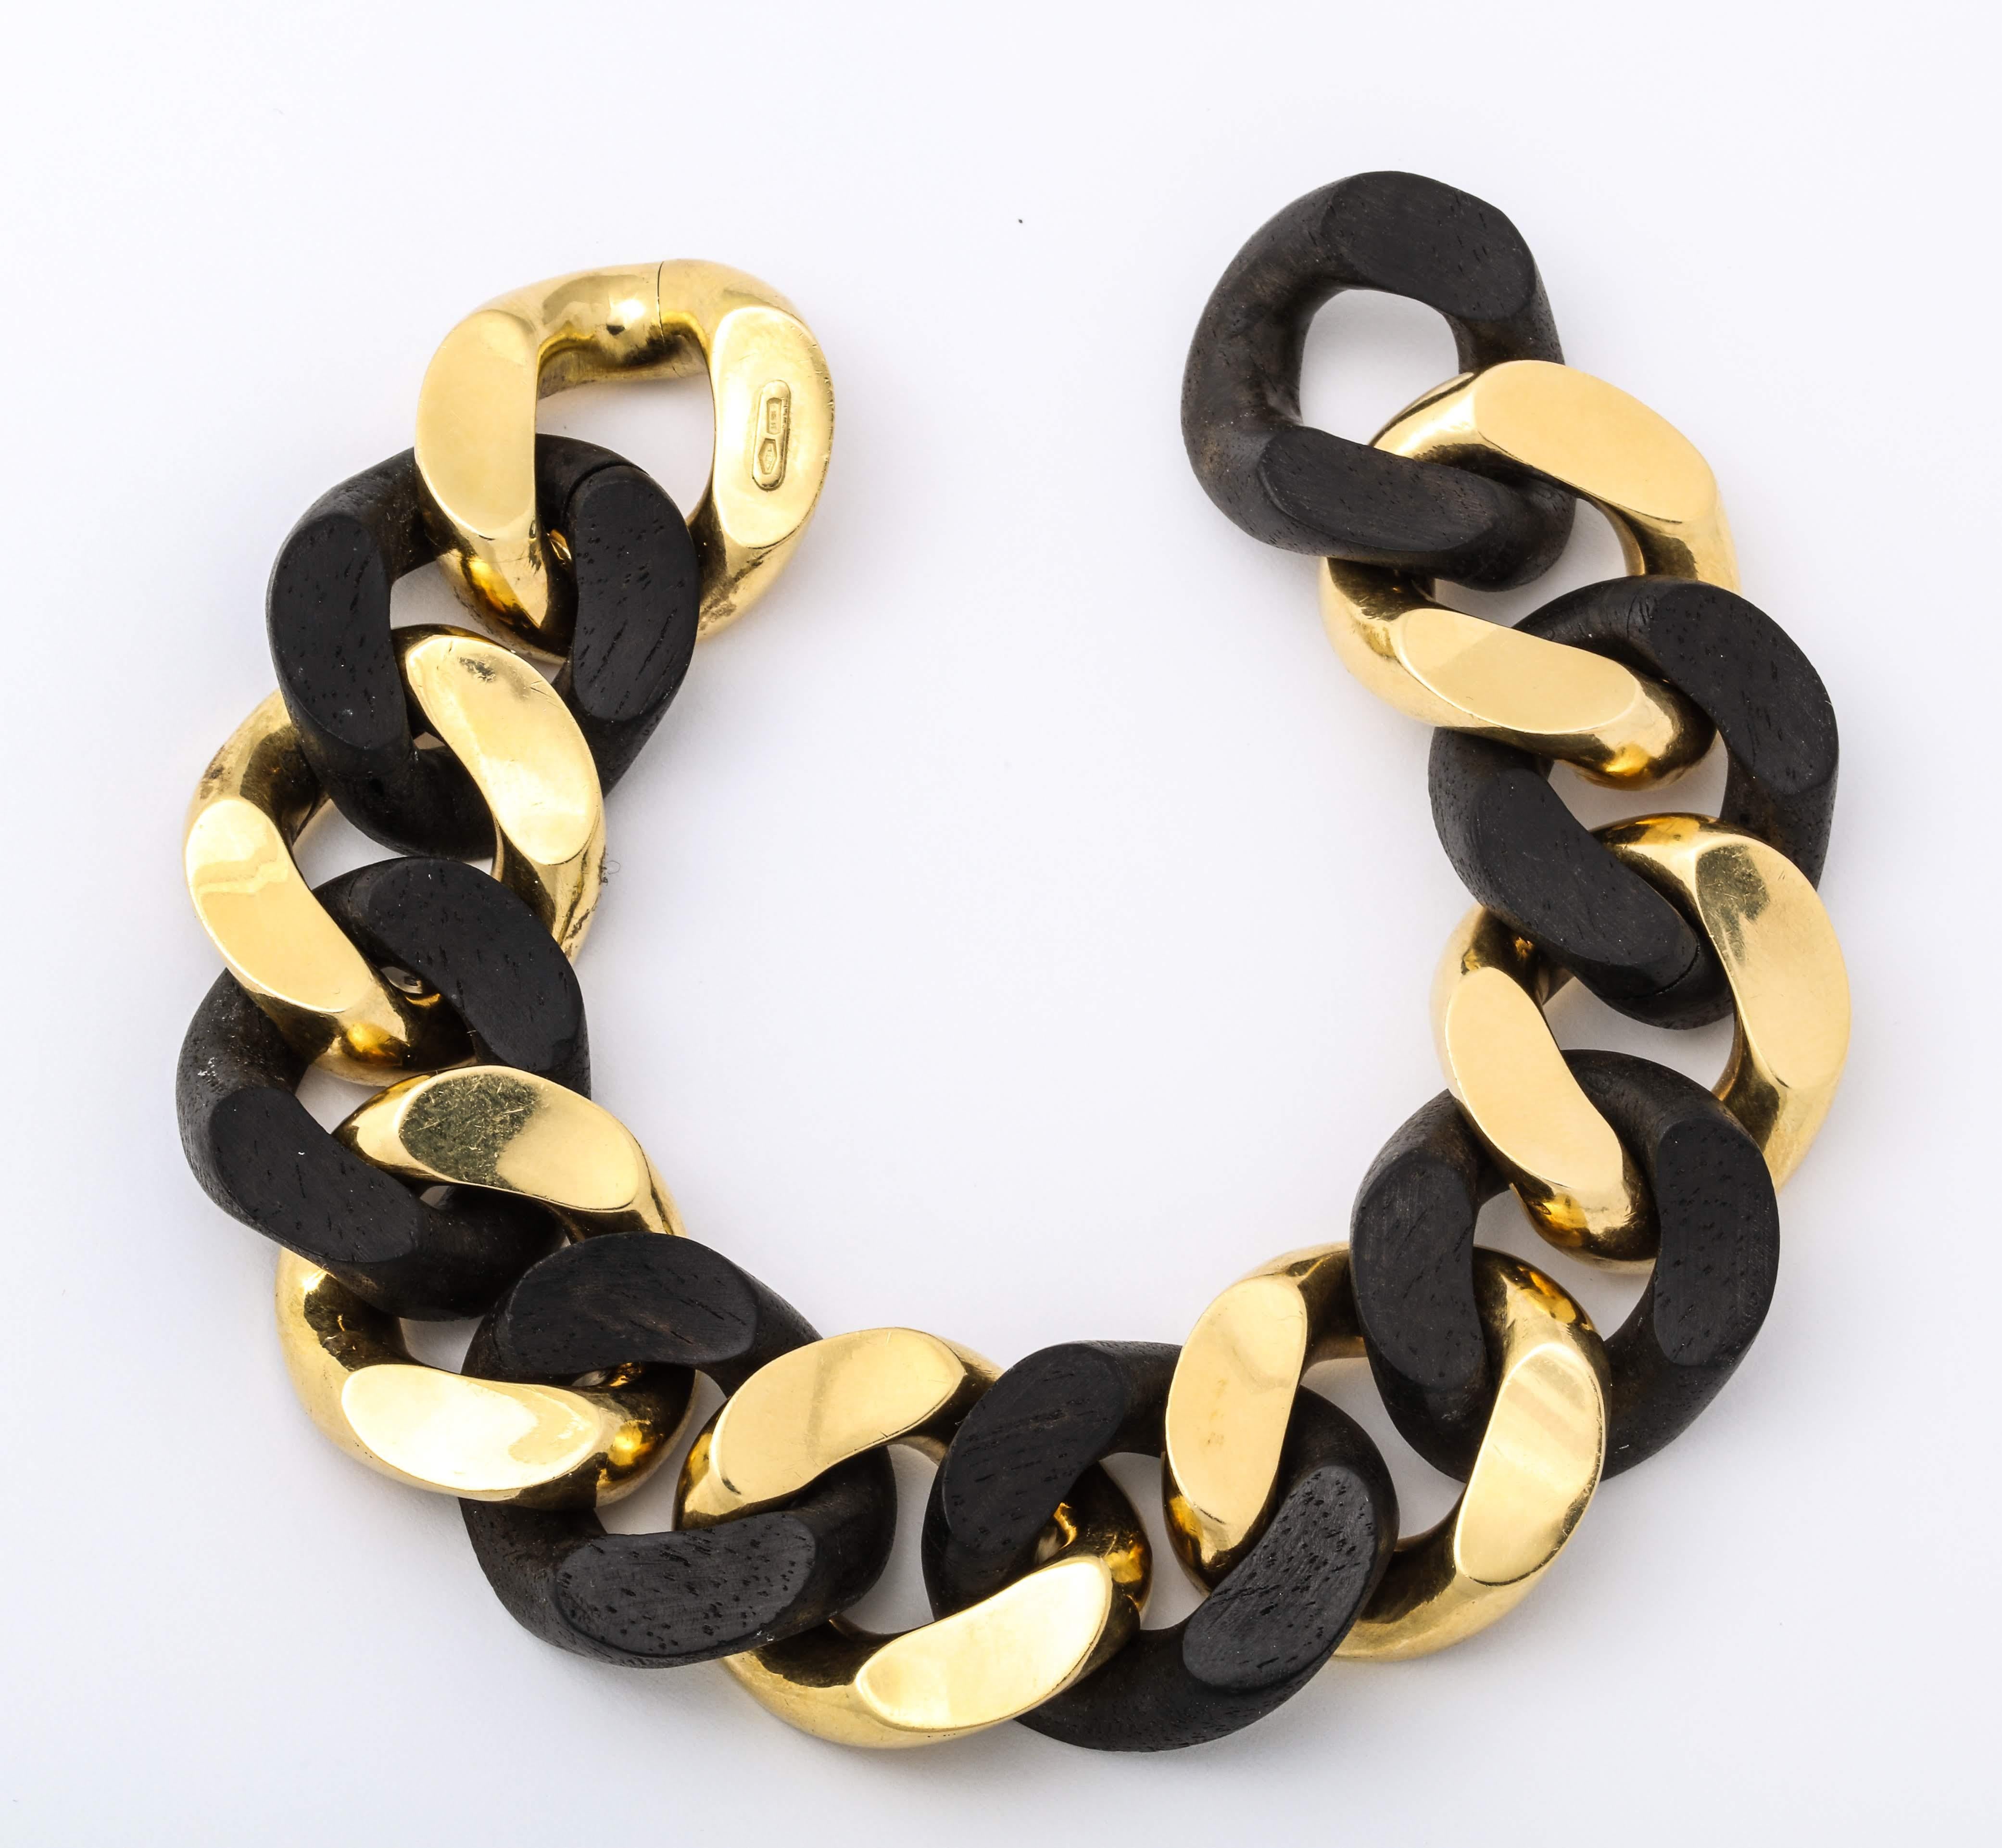 Urban and chic 18K yellow gold concave curb links alternating with convex ebony wood link bracelet.

Dimensions: Length: 8 inches  Width: 15/16 inches  Elevation: 1/4 inches

Matching necklace, sold separately.